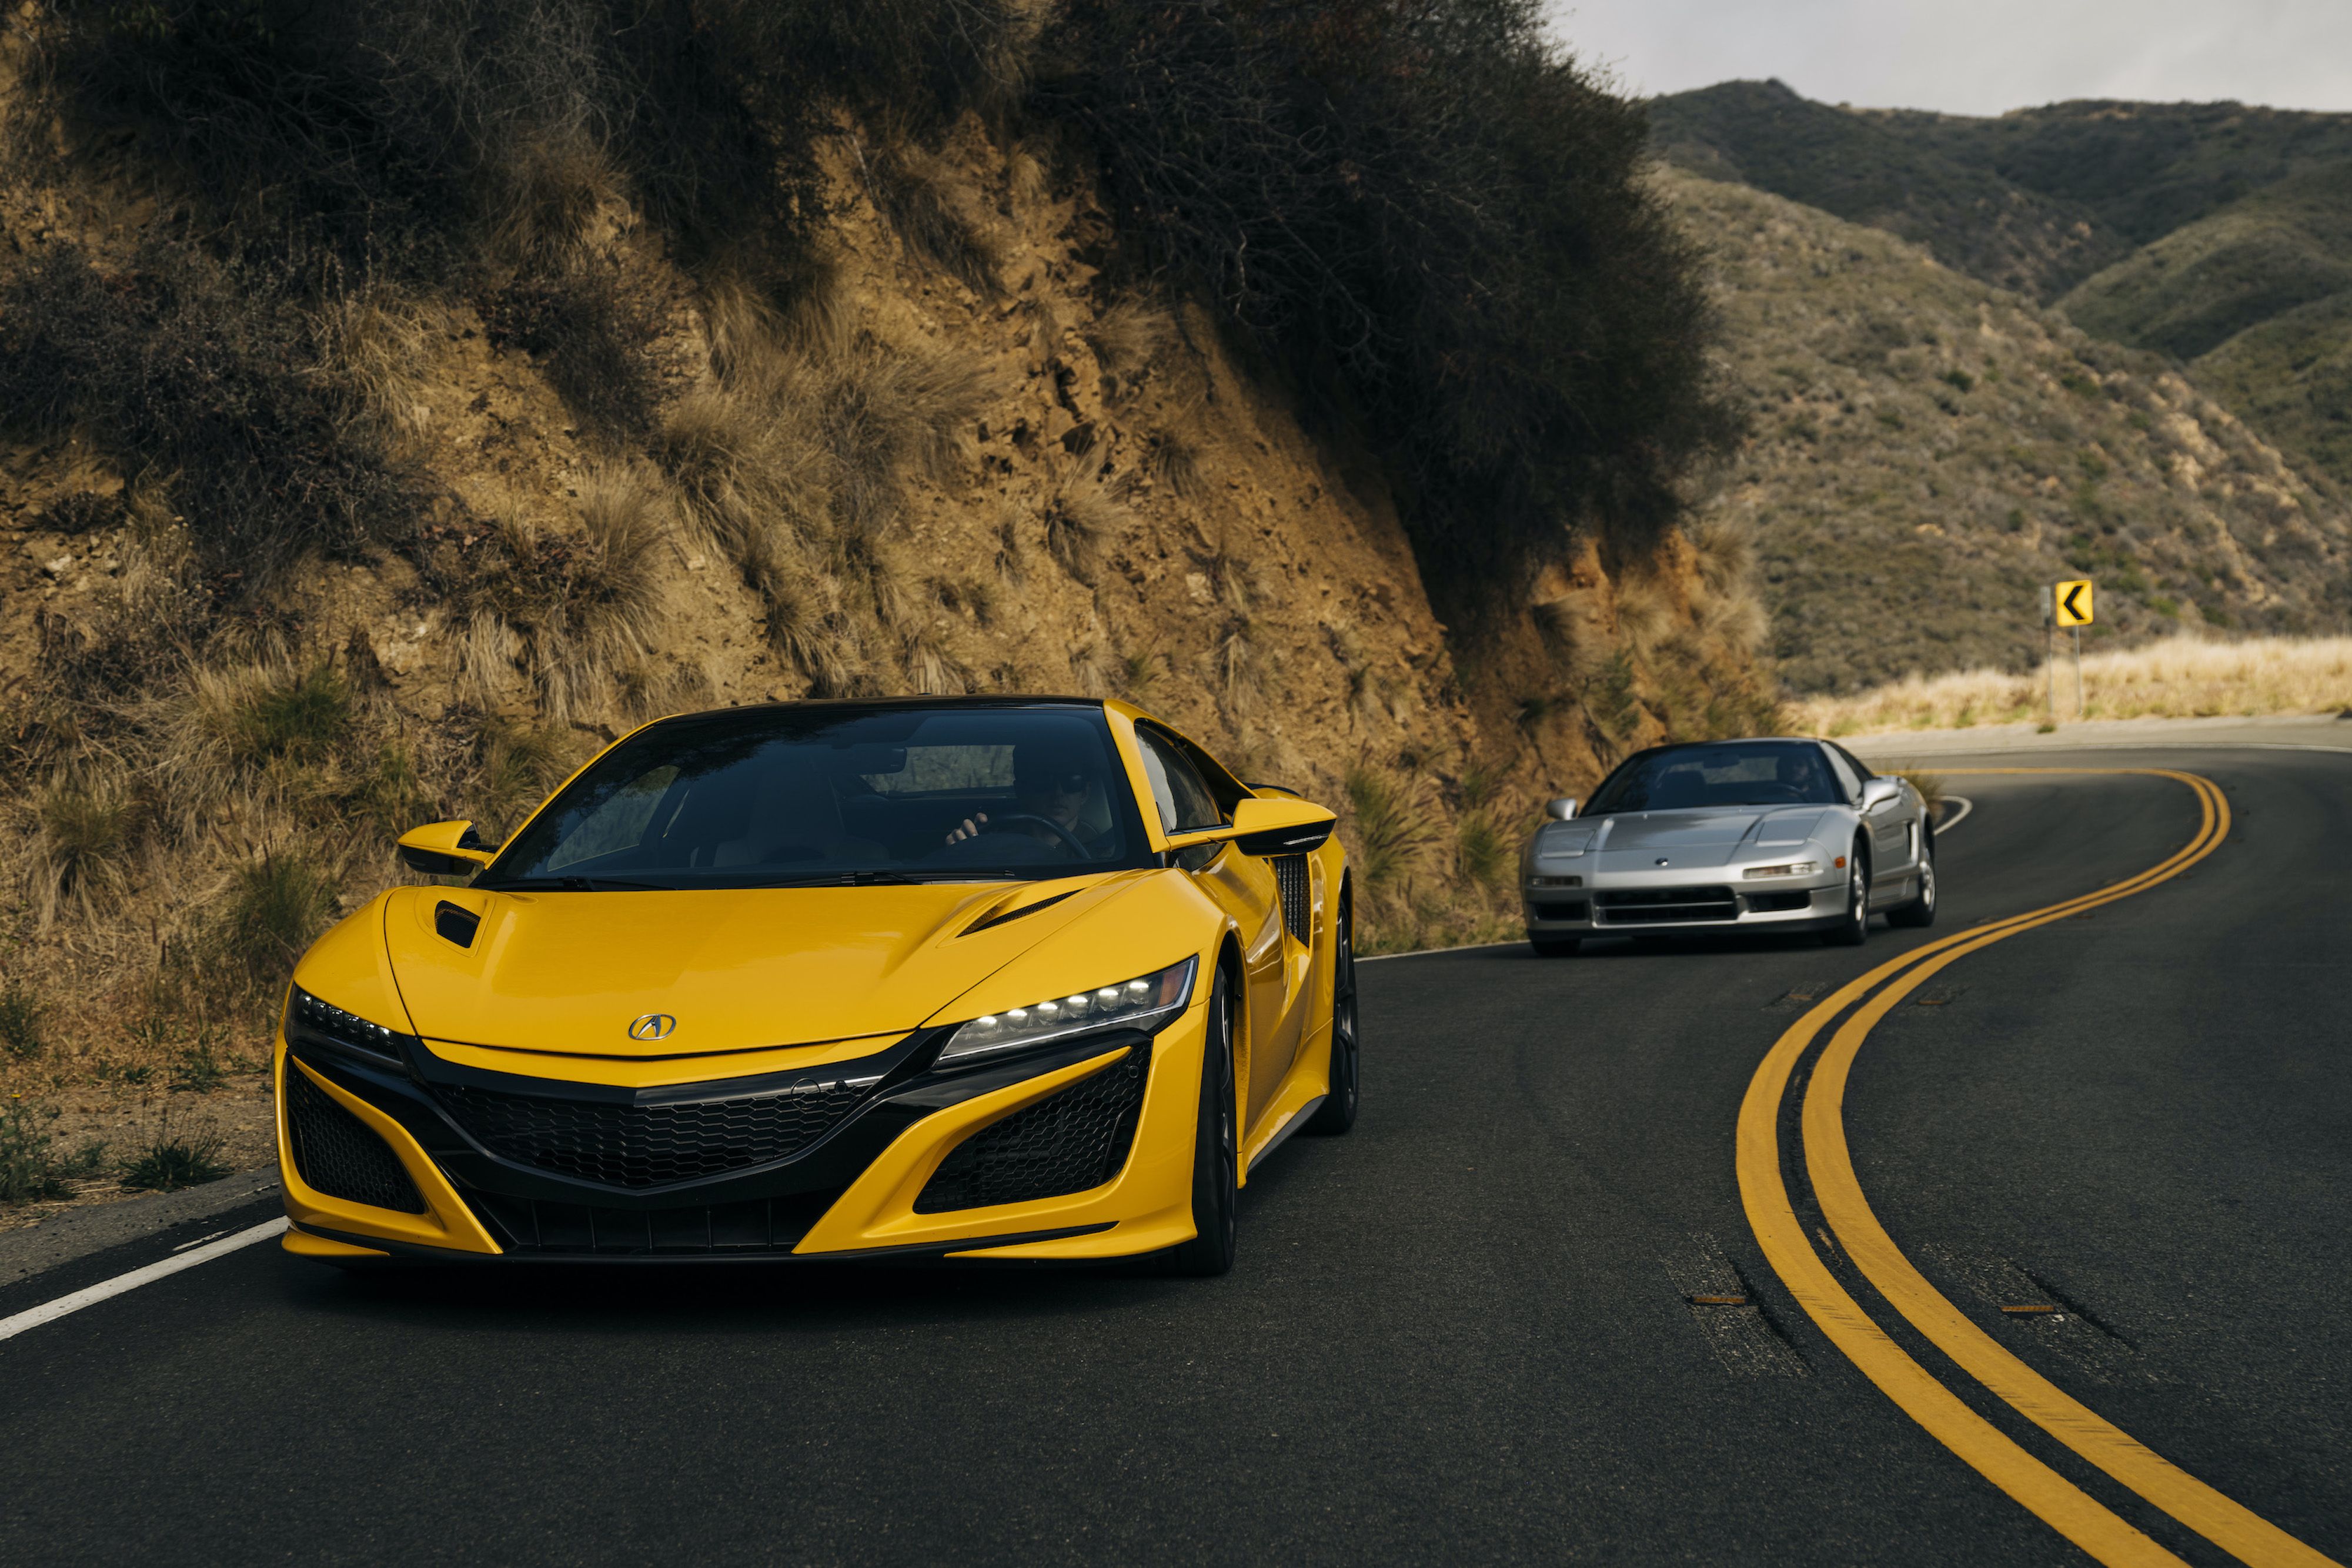 The Acura Nsx Exemplifies The March Of Progress